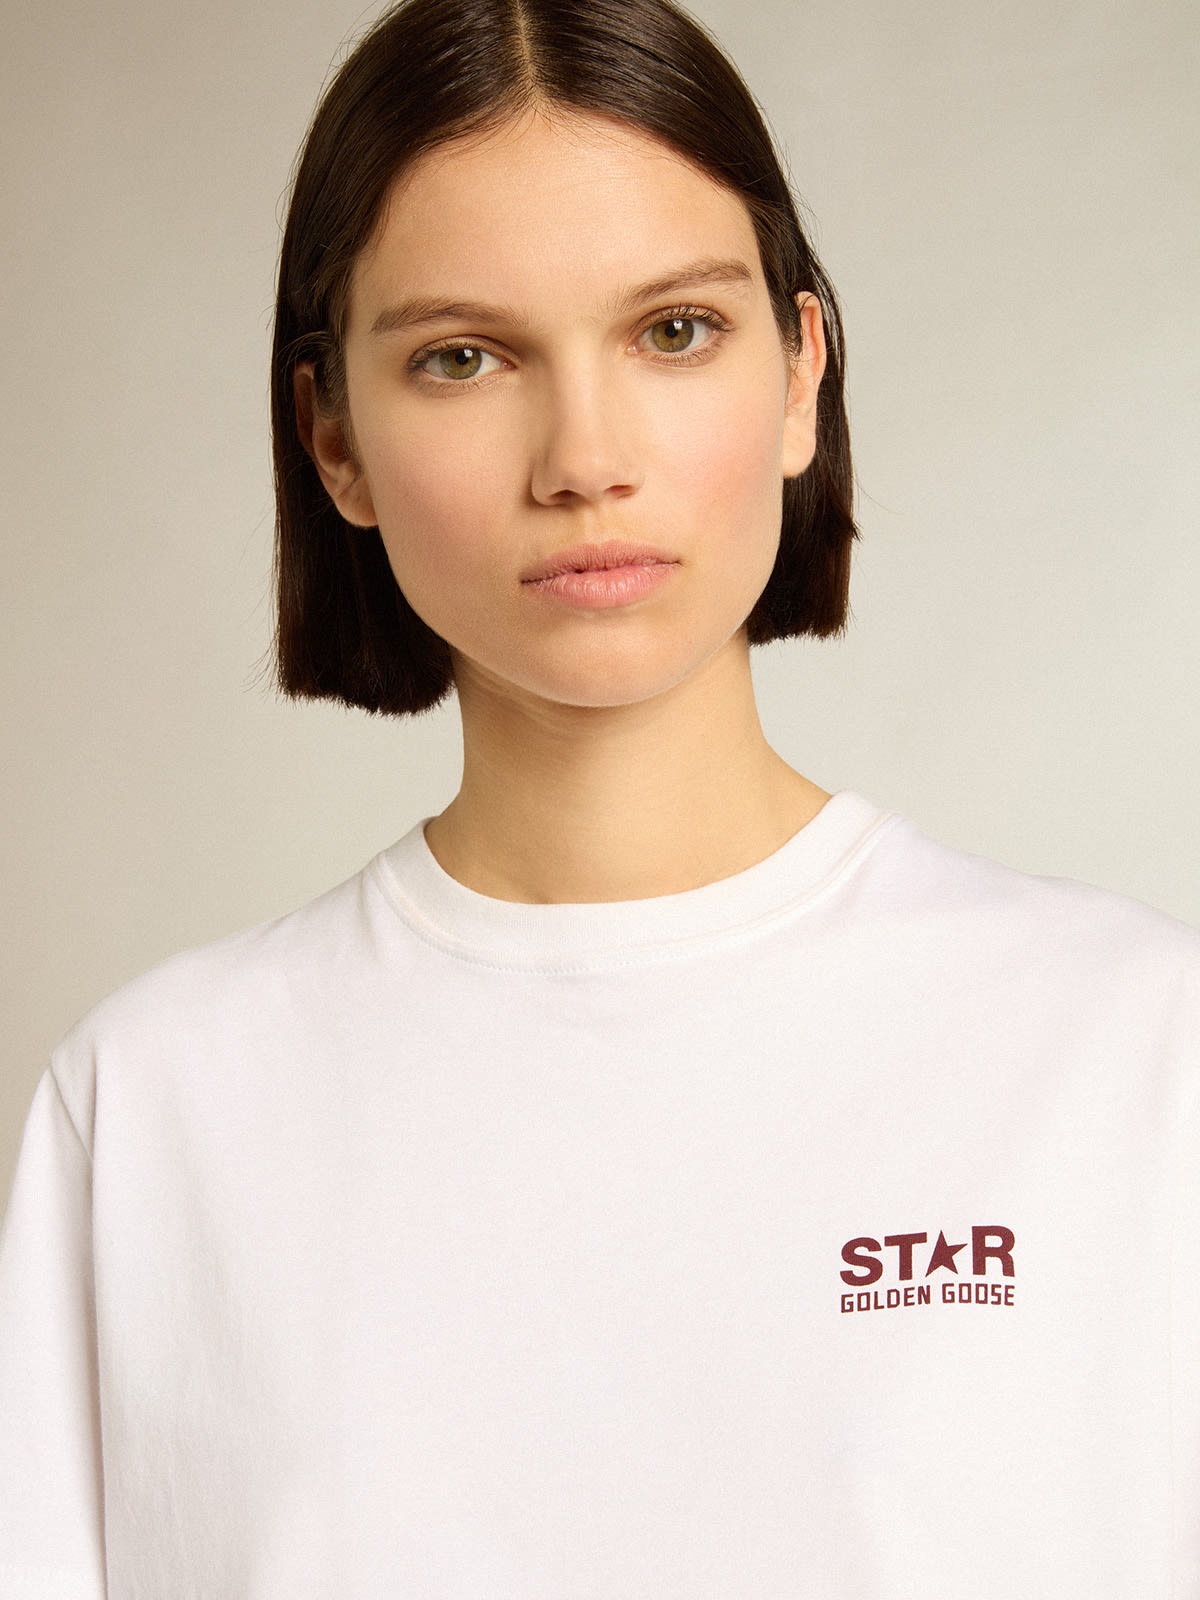 Women’s white T-shirt with burgundy star on the front - 2